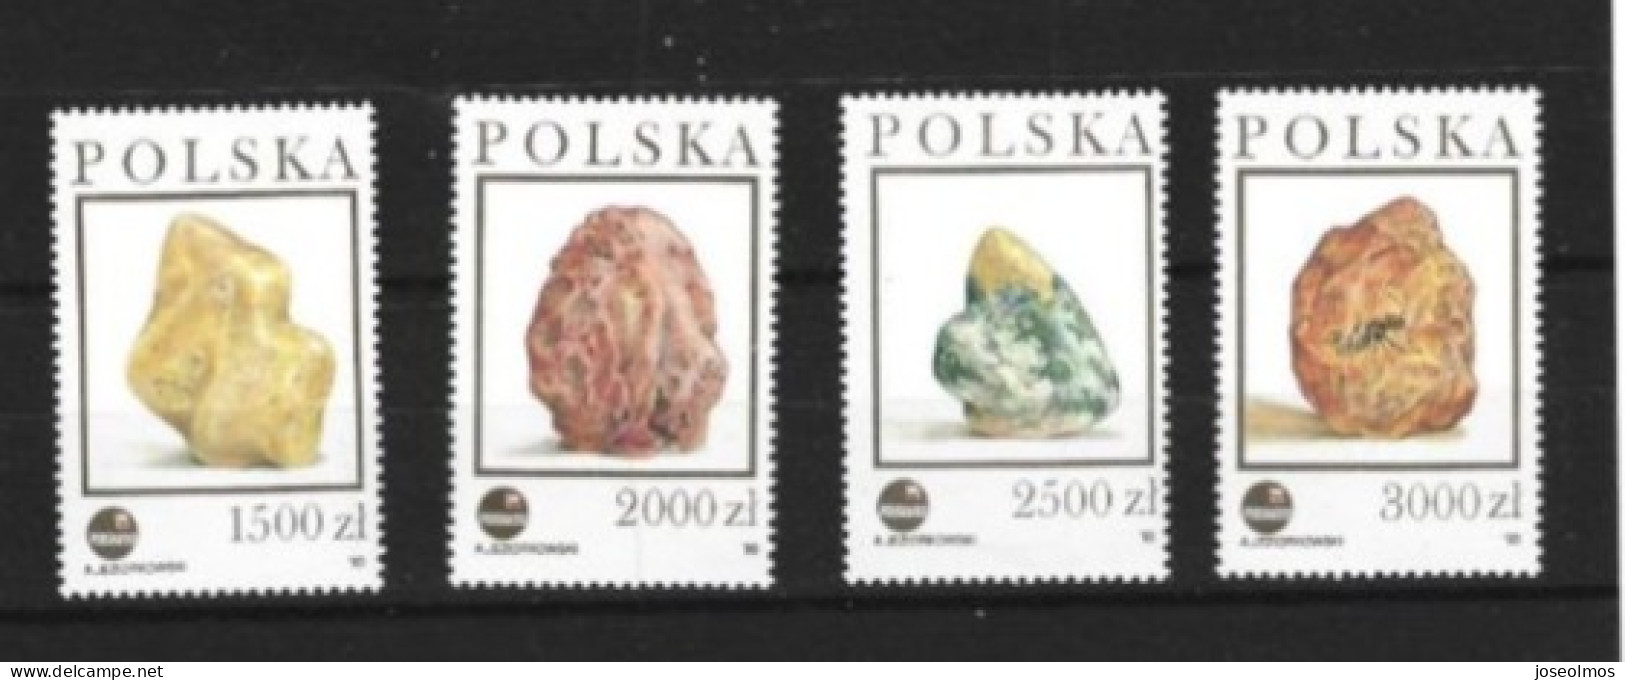 POLOGNE ANNEE 1993 N°3426-3429 MI NEUF** LUXE MNH - Nuevos